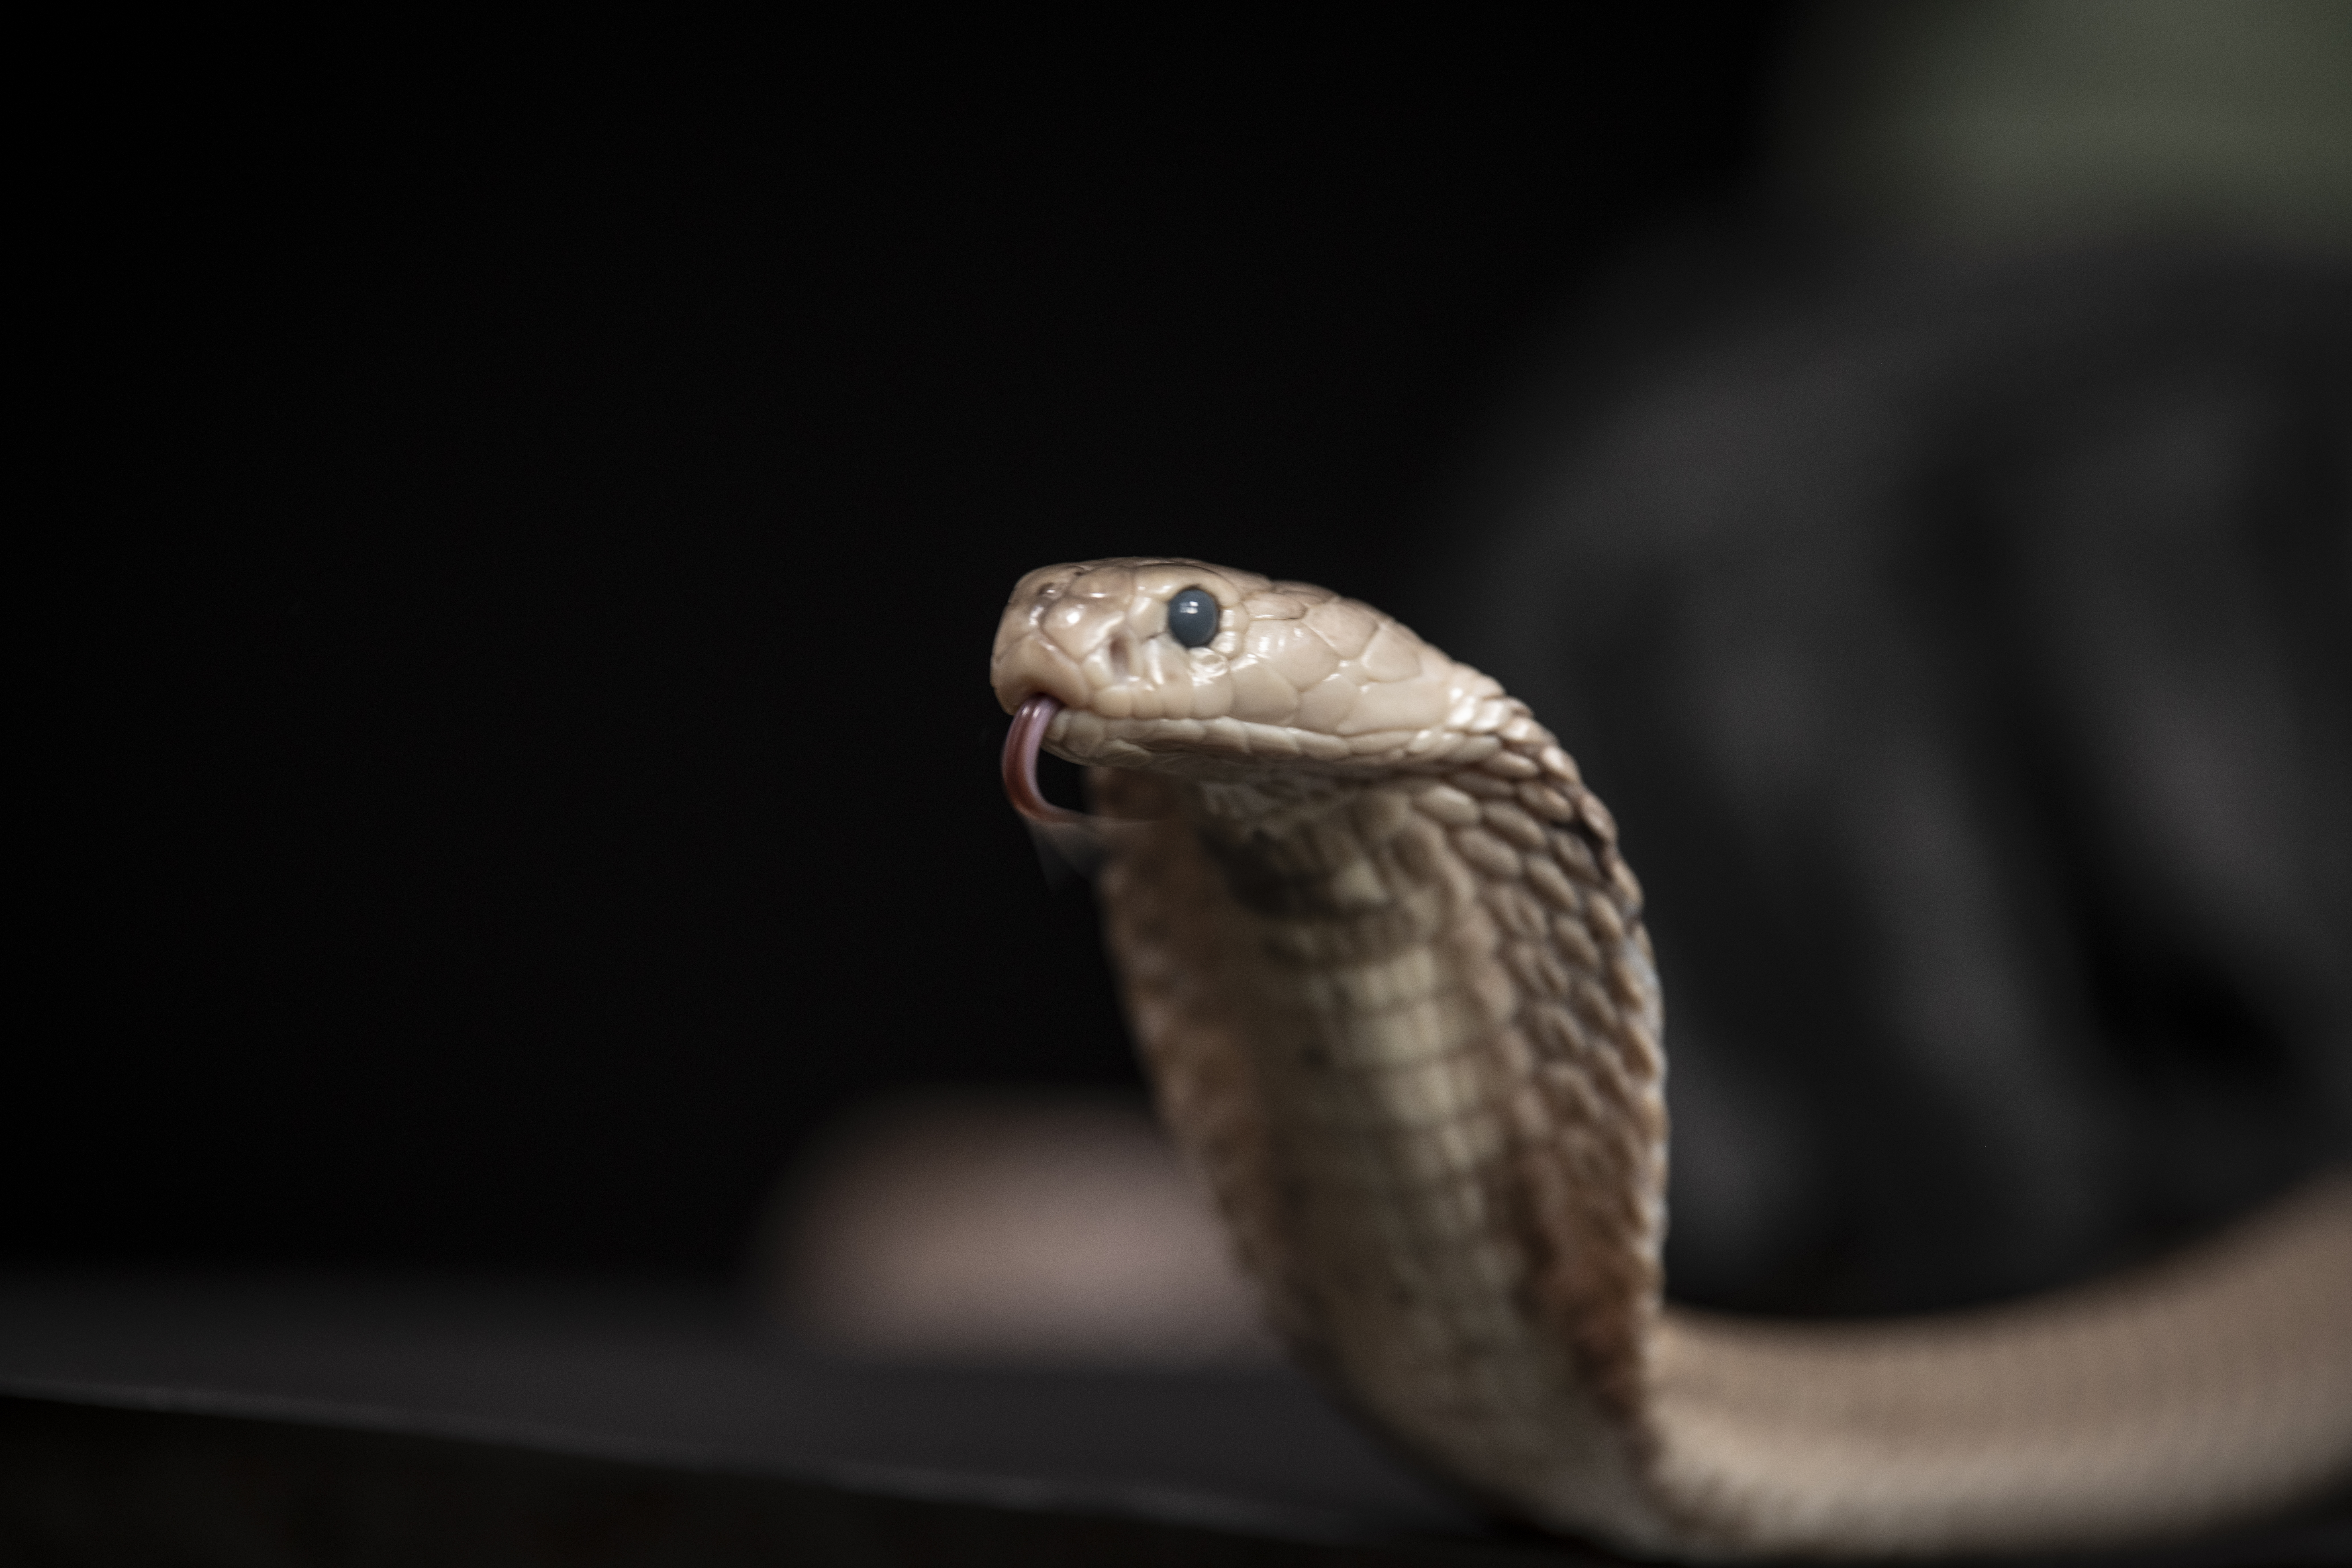 Scripps Research scientists discovered an antibody that represents a large step toward creating a universal antivenom, which would be effective against the venom of all snakes